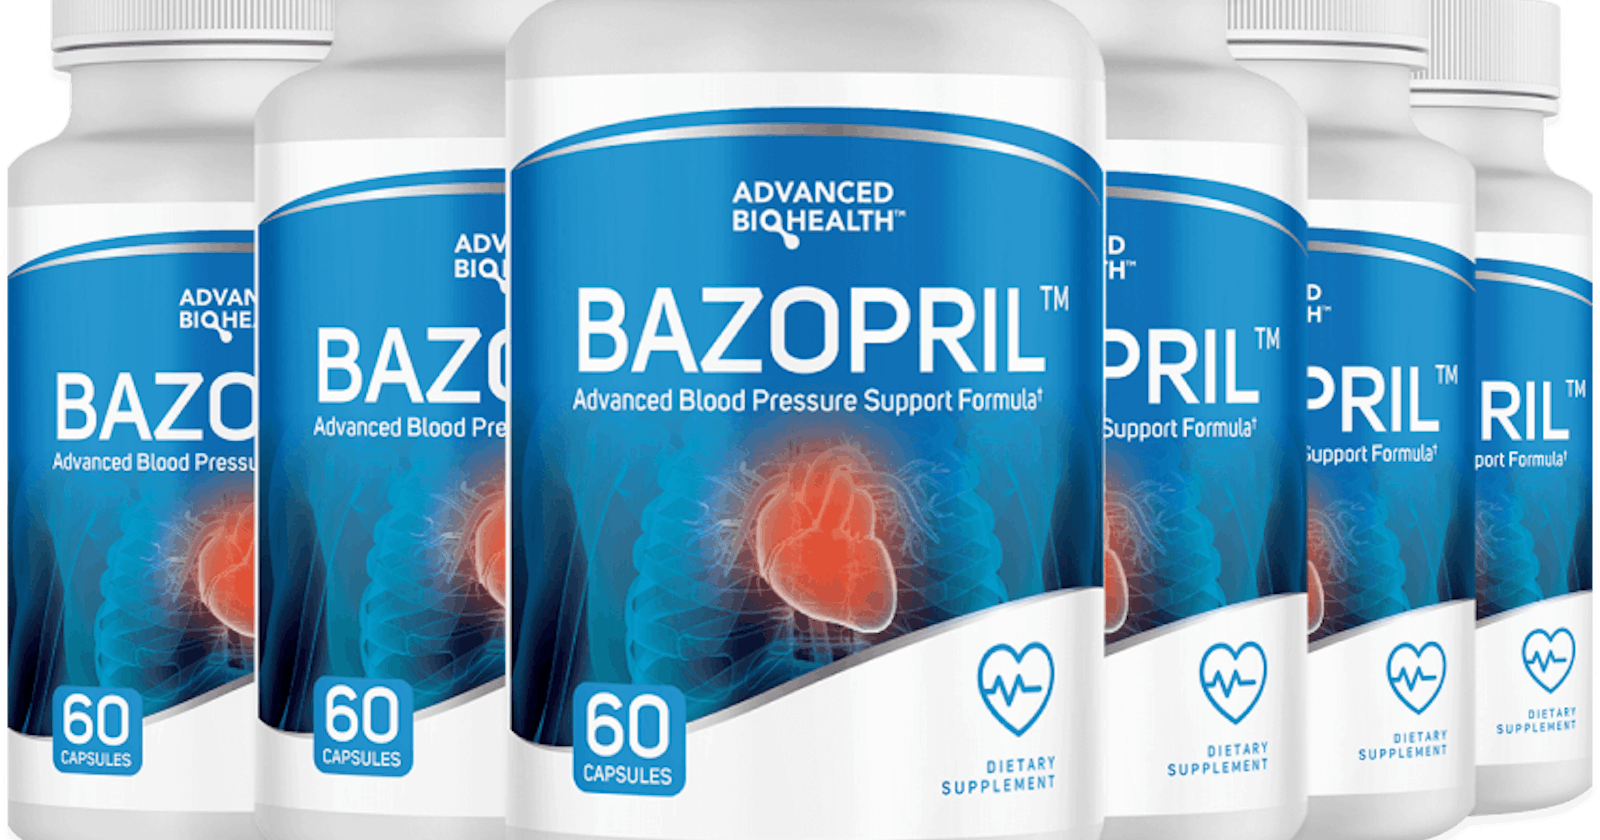 Bazopril Advanced Blood Pressure Formula Reviews Is What You All Need To Know About Bazopril!